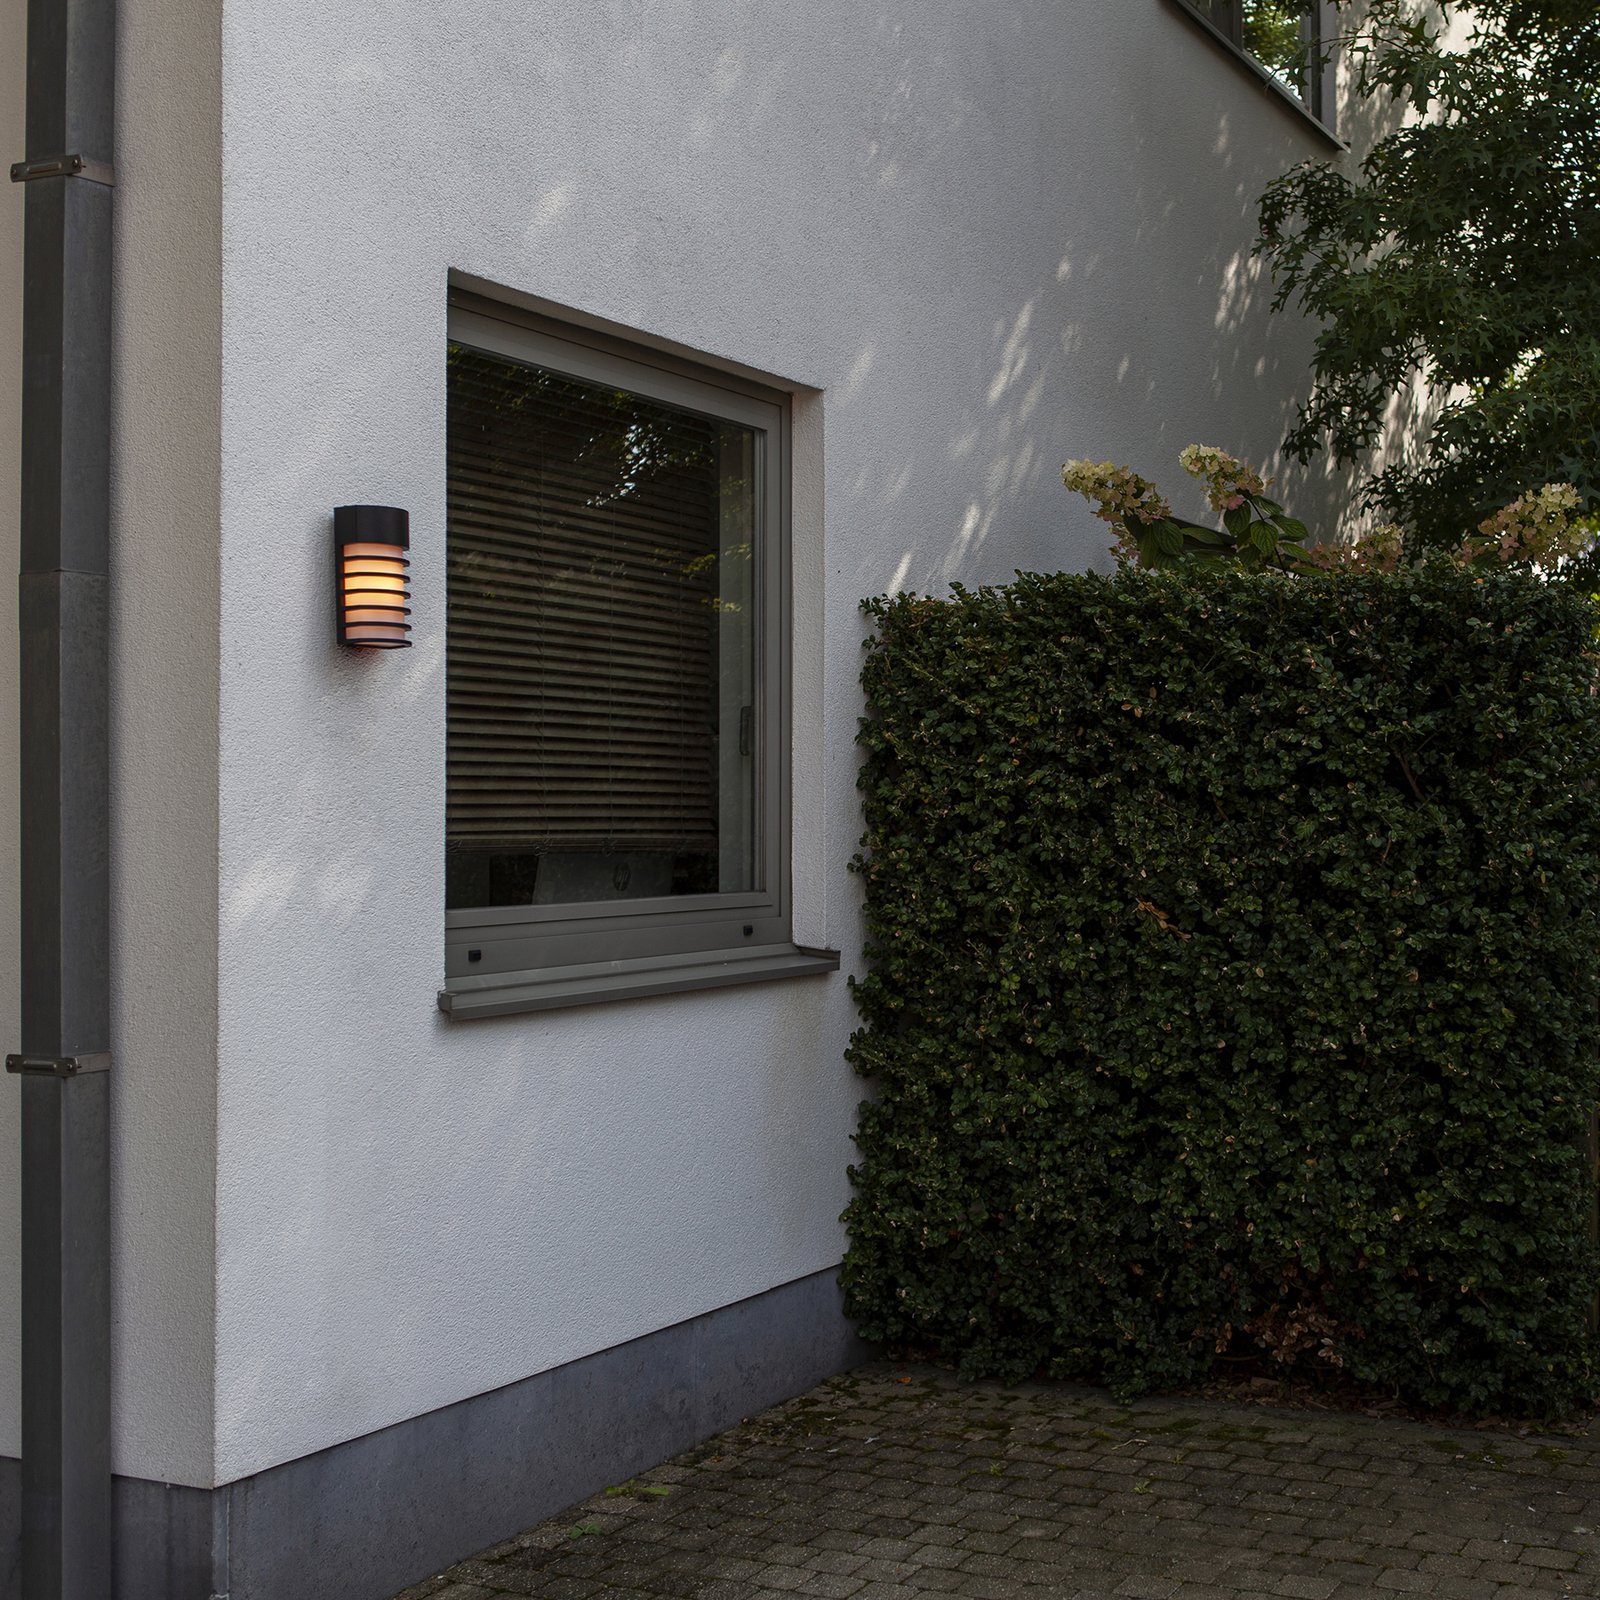 Fulton outdoor wall light with louvre design